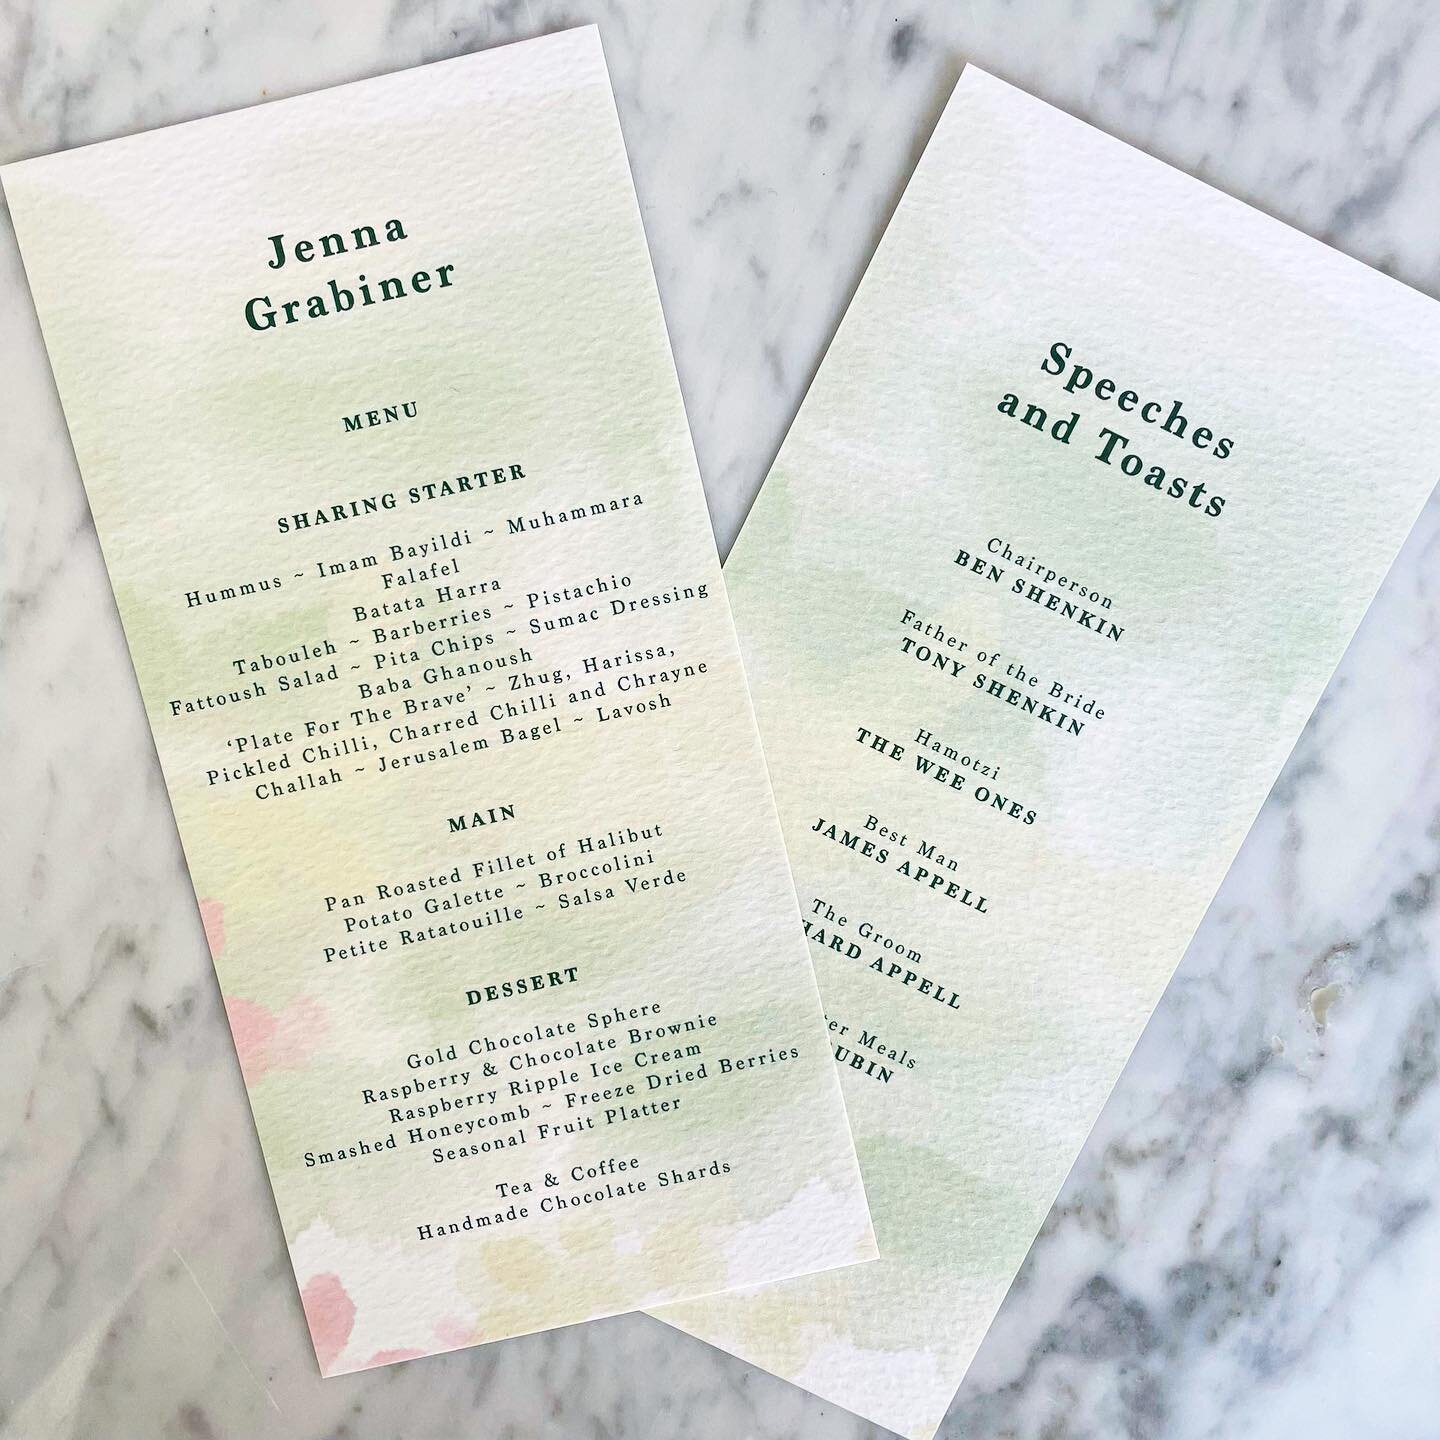 Our signature watercolour style looking beaut on these double sided menu &amp; speech cards 🎨
.
.
.
#weddingstationery #watercolourstationery #weddingmenu #speeches #weddingspeech #proudlyprinted #personalisation #livandluc